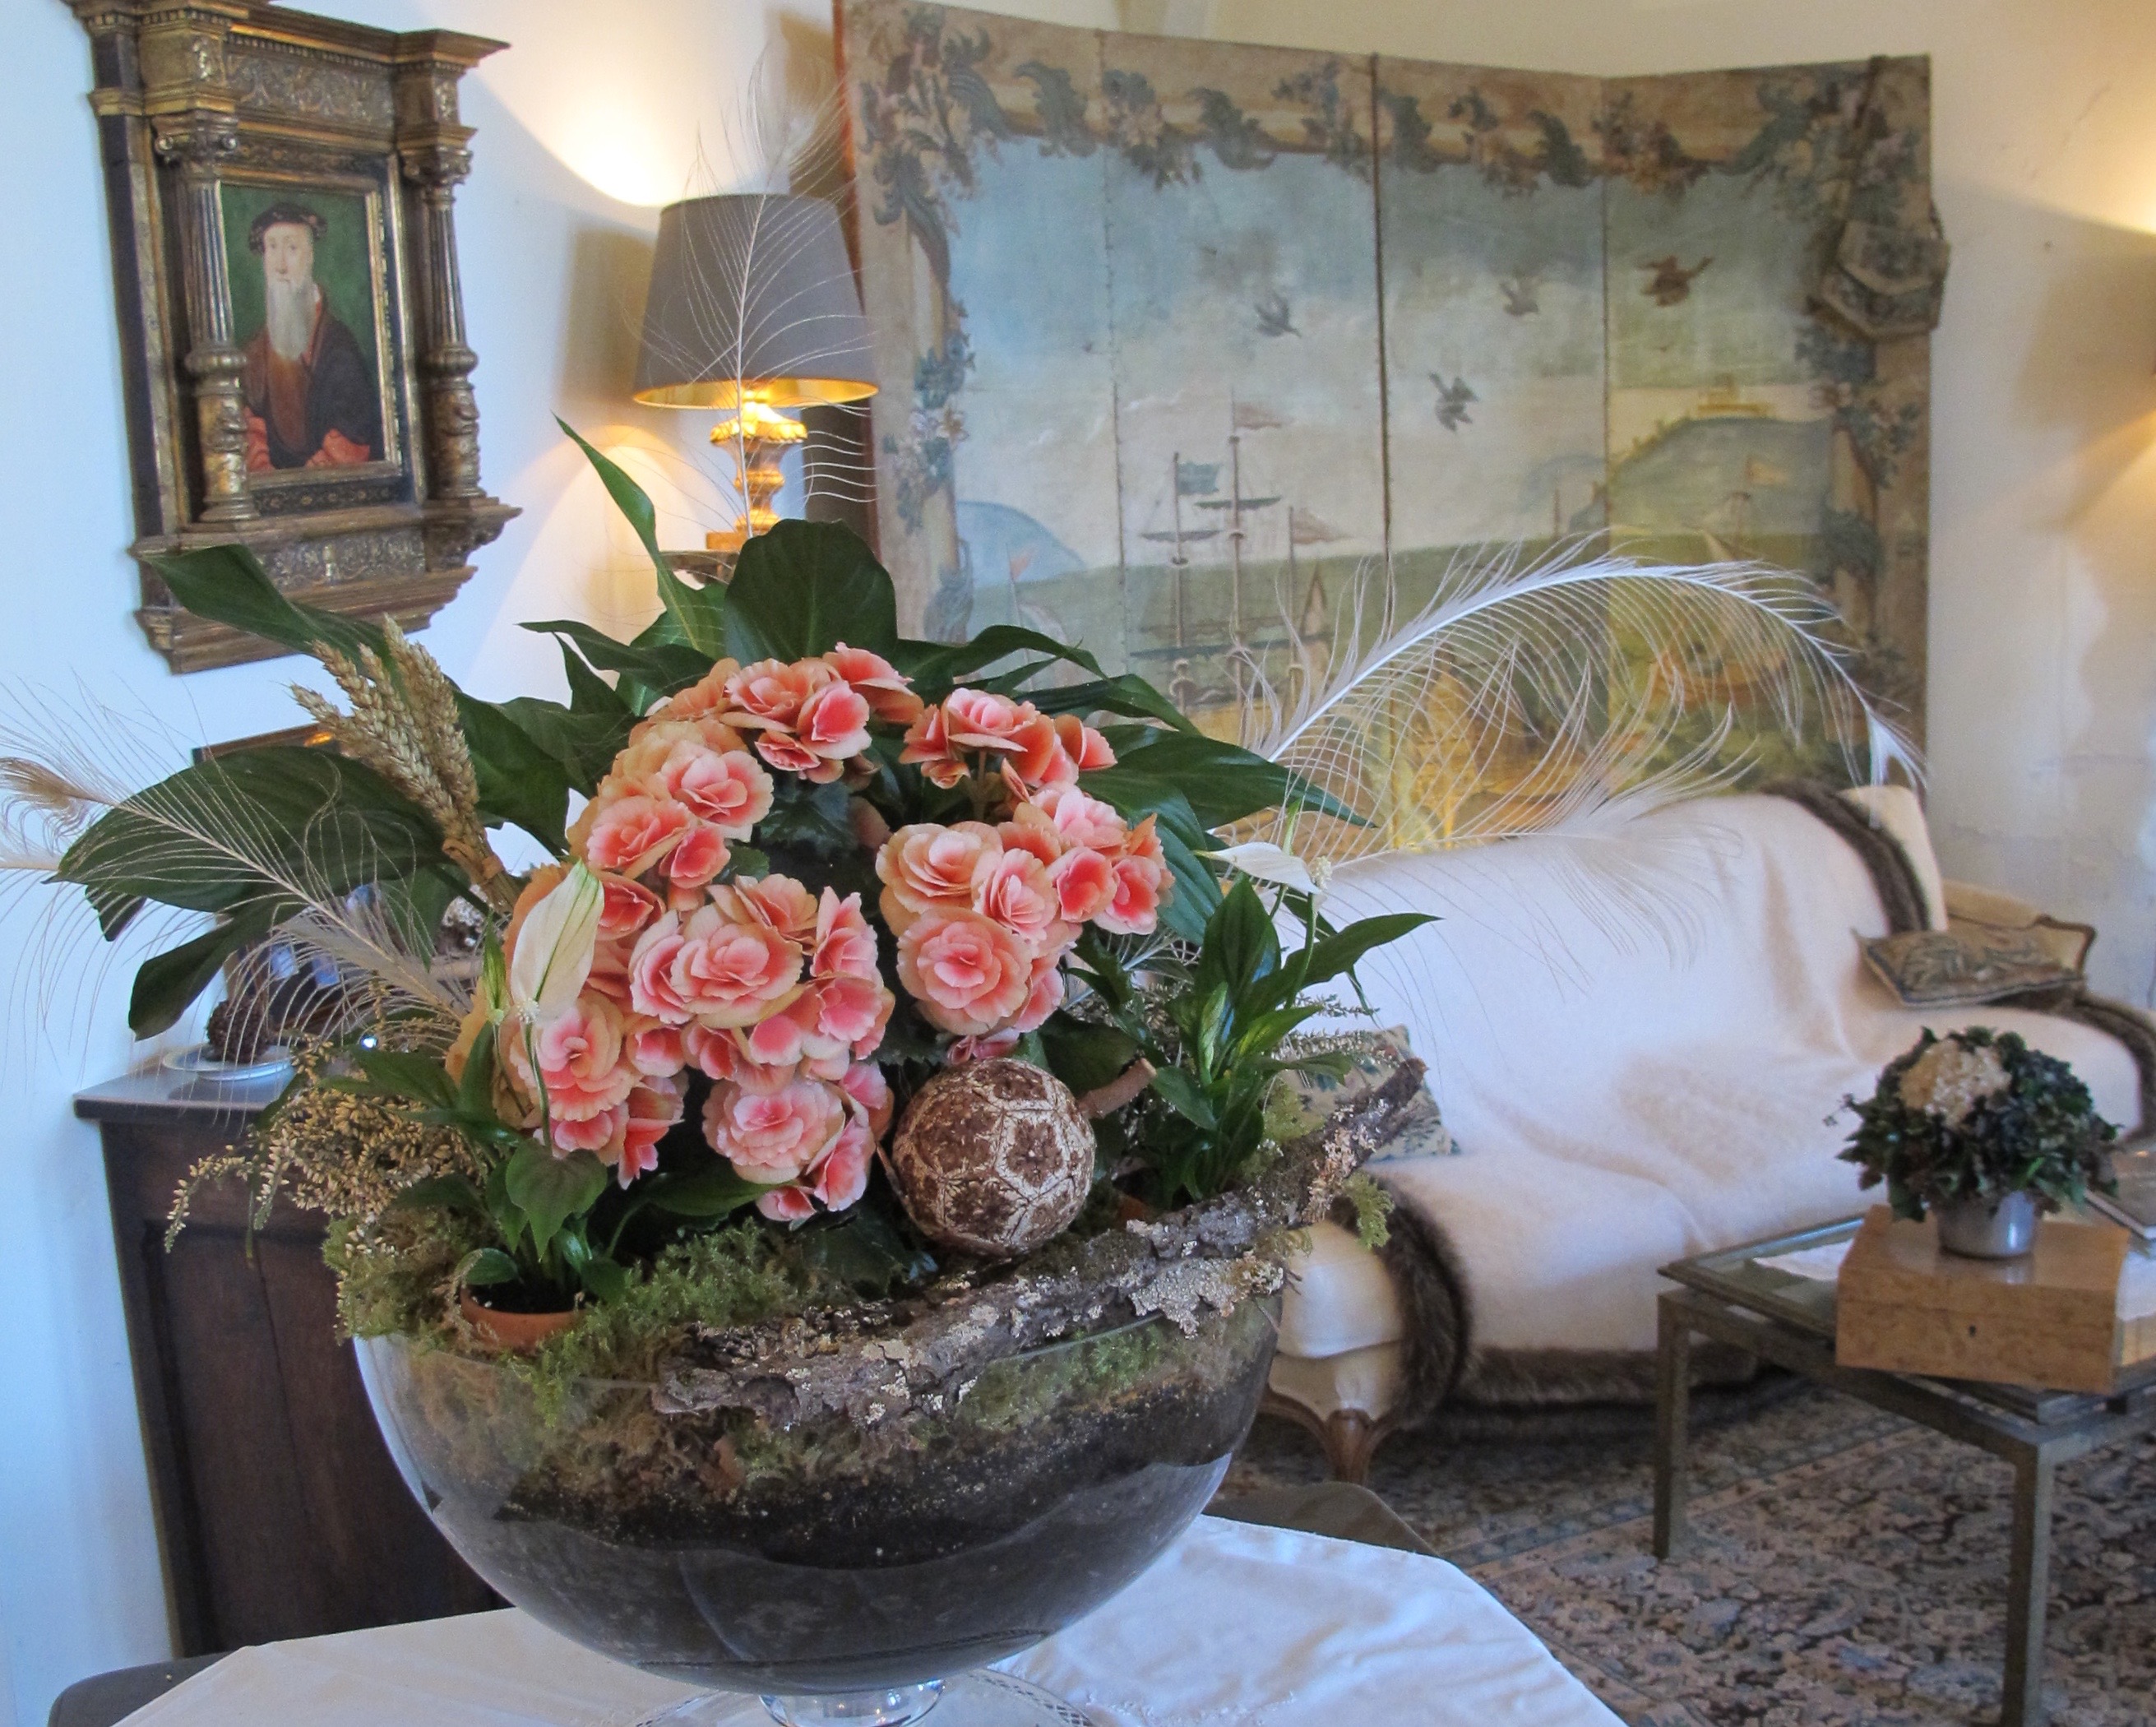 Each room in Madame Ménage-Small's Château is beautifully appointed with antiques, drapery and fresh flowers.